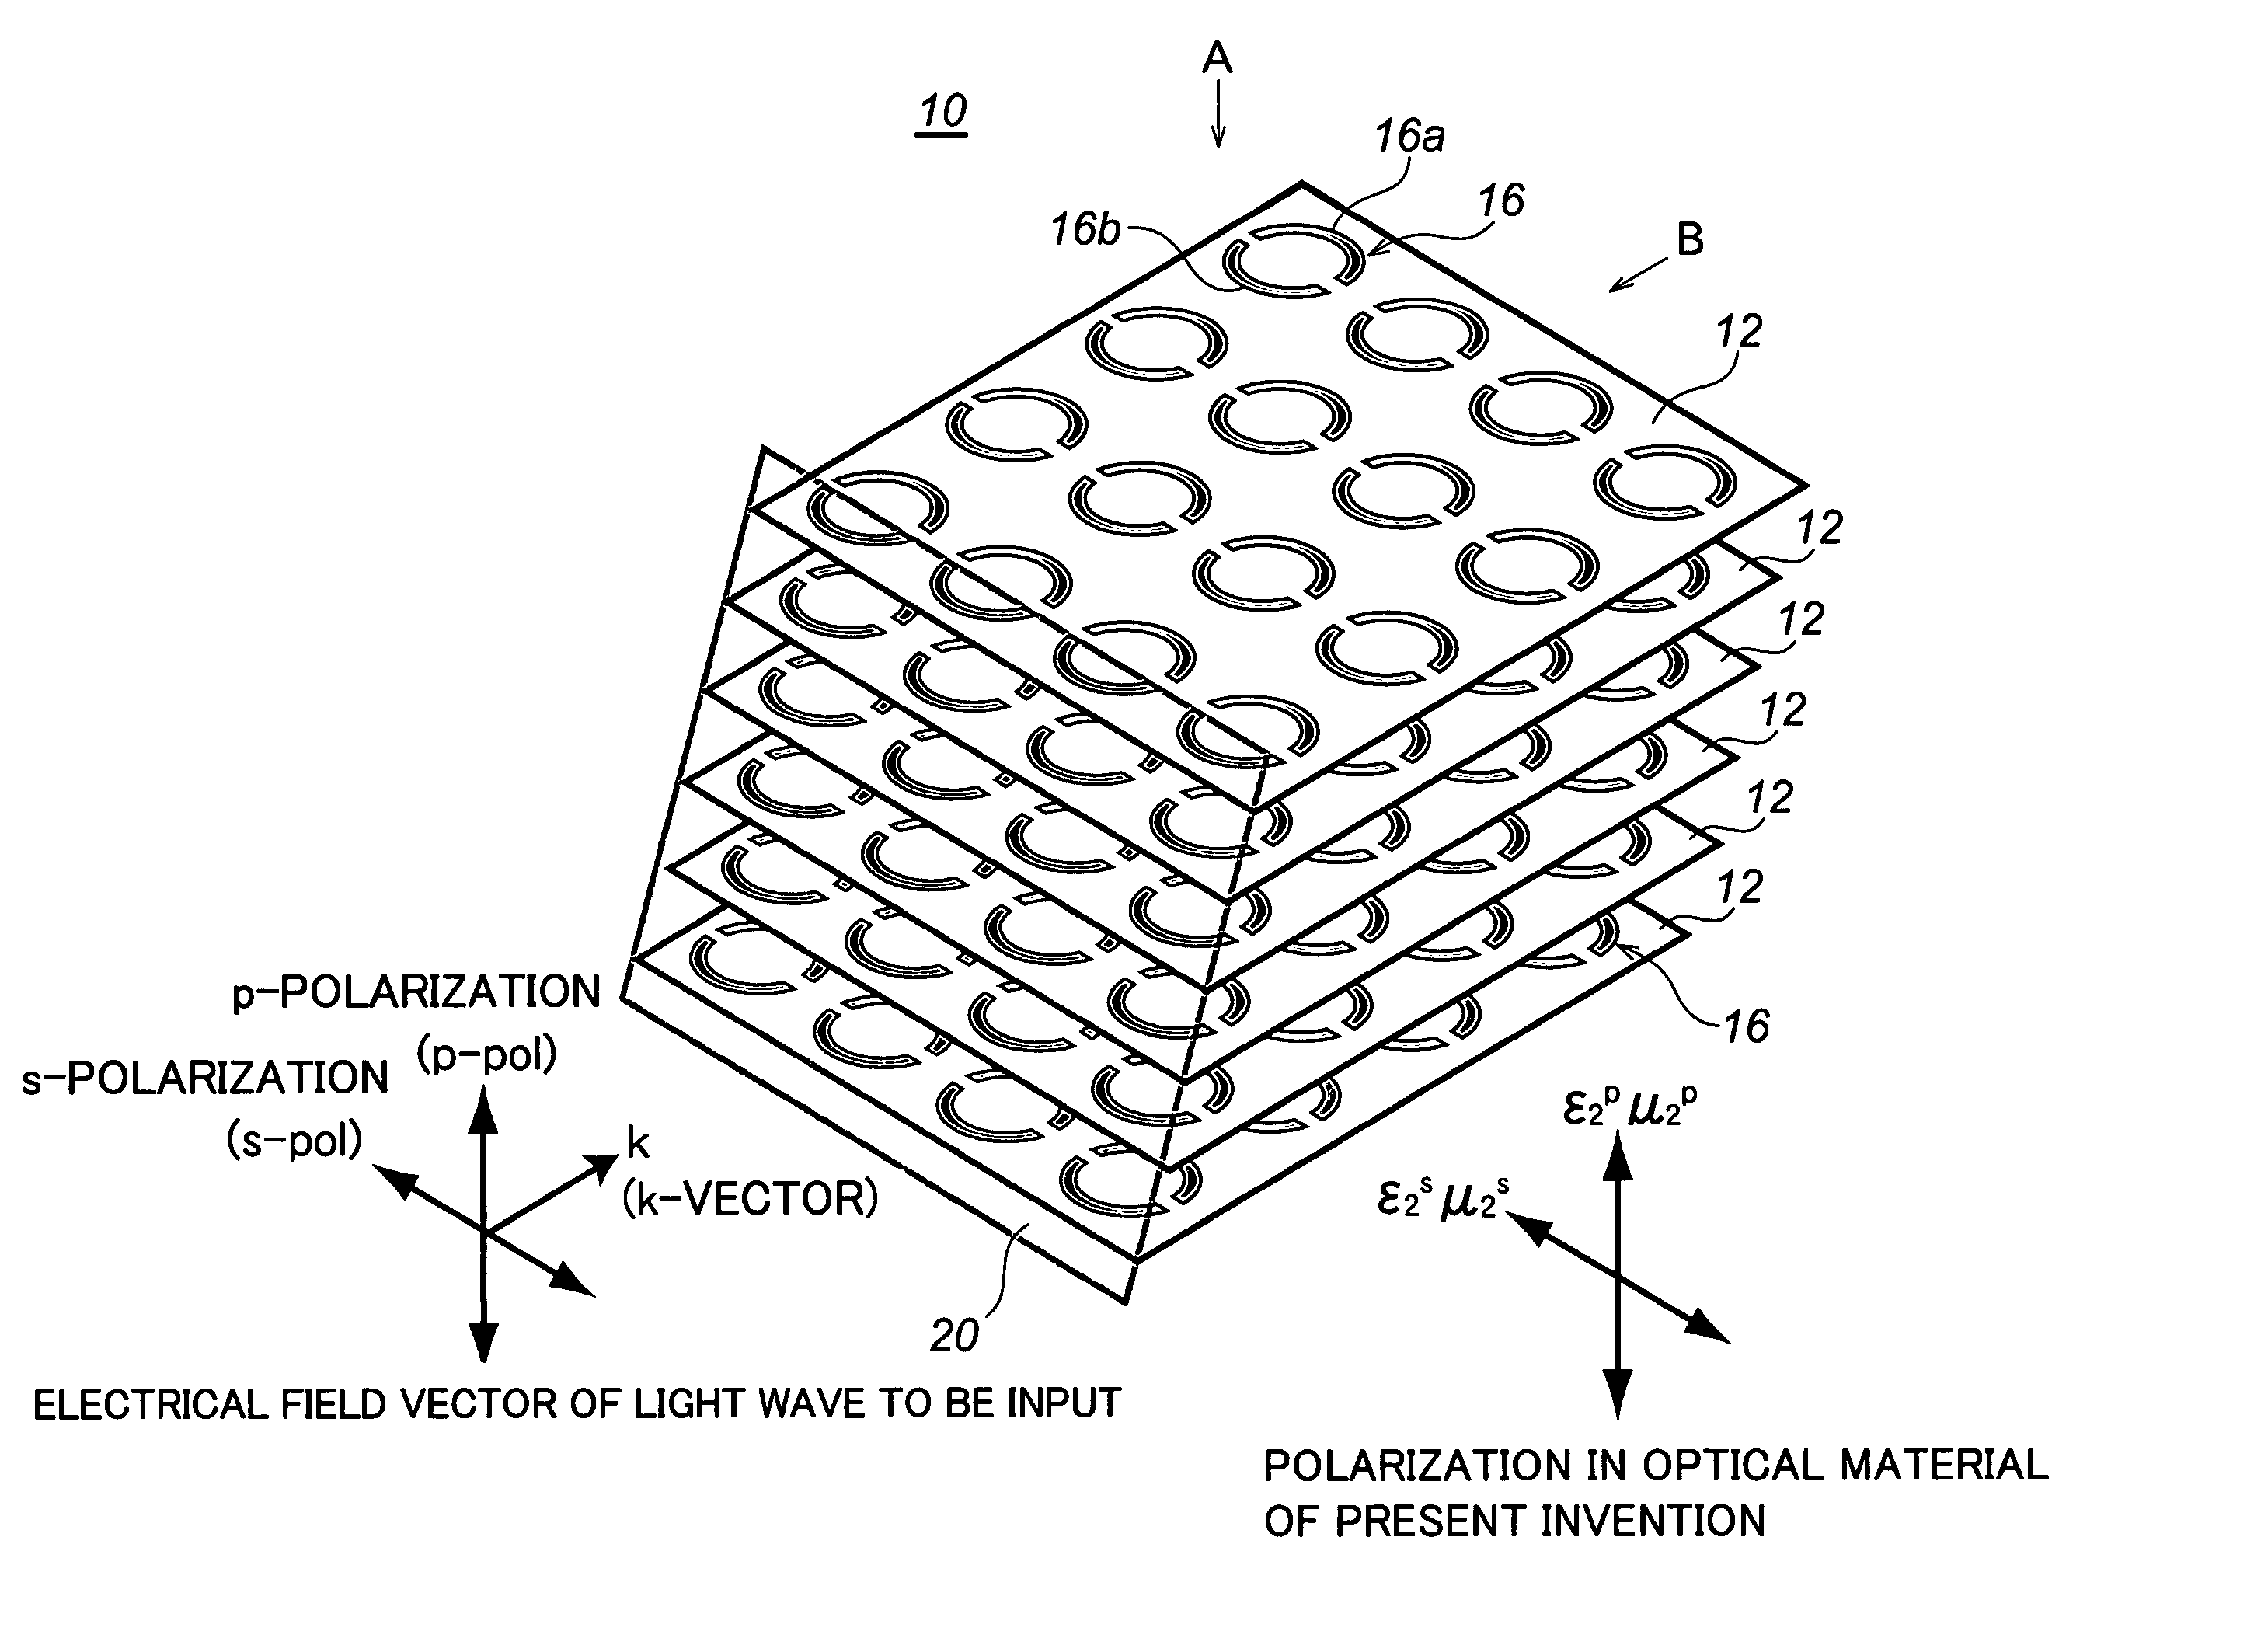 Optical material, optical device fabricated therefrom, and method for fabricating the same